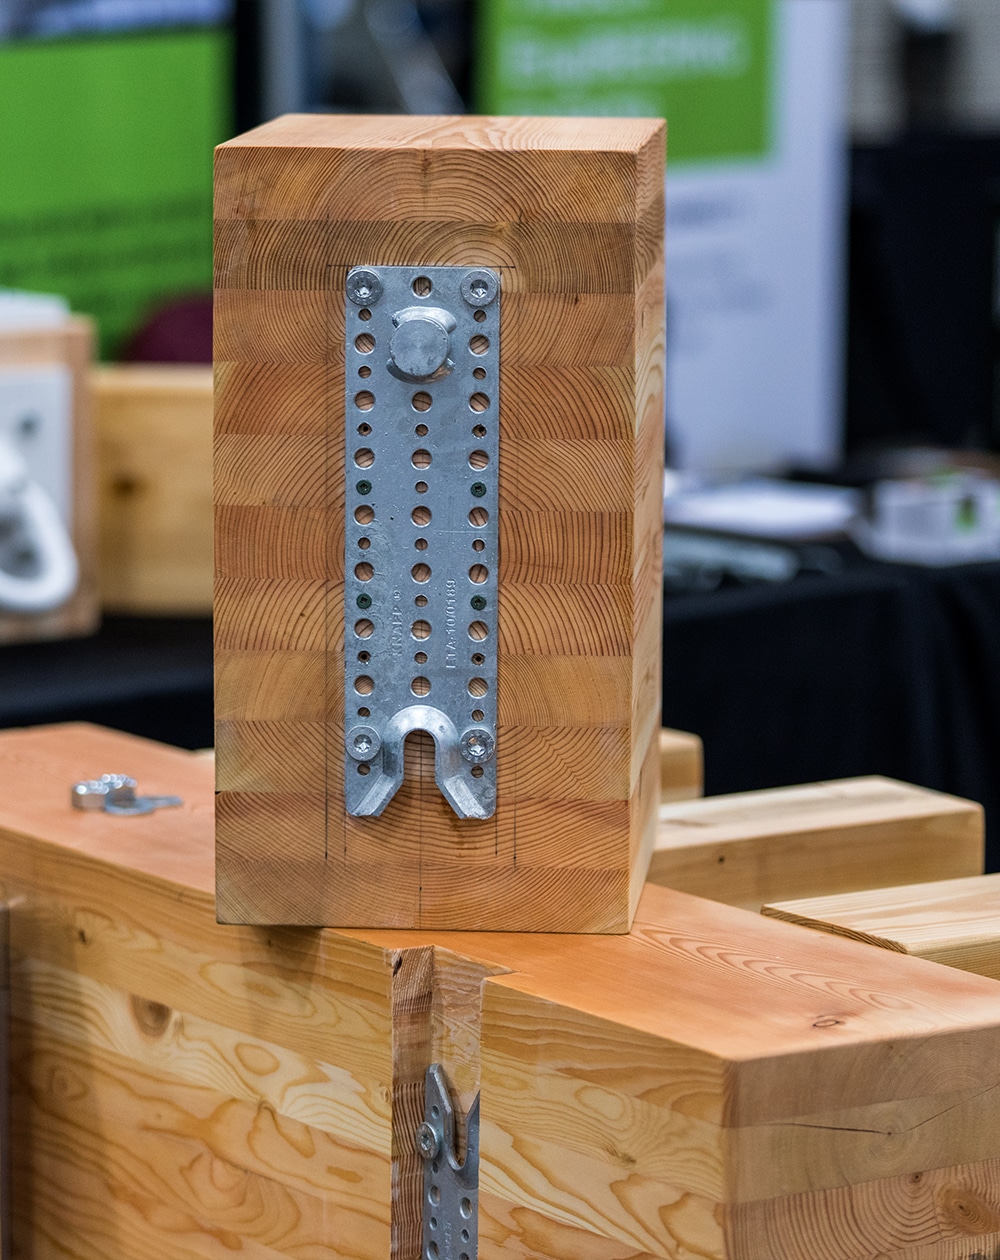 Cross-laminated timber and other mass timber manufacturing and construction is the focus of the conference educational panels and exhibit hall